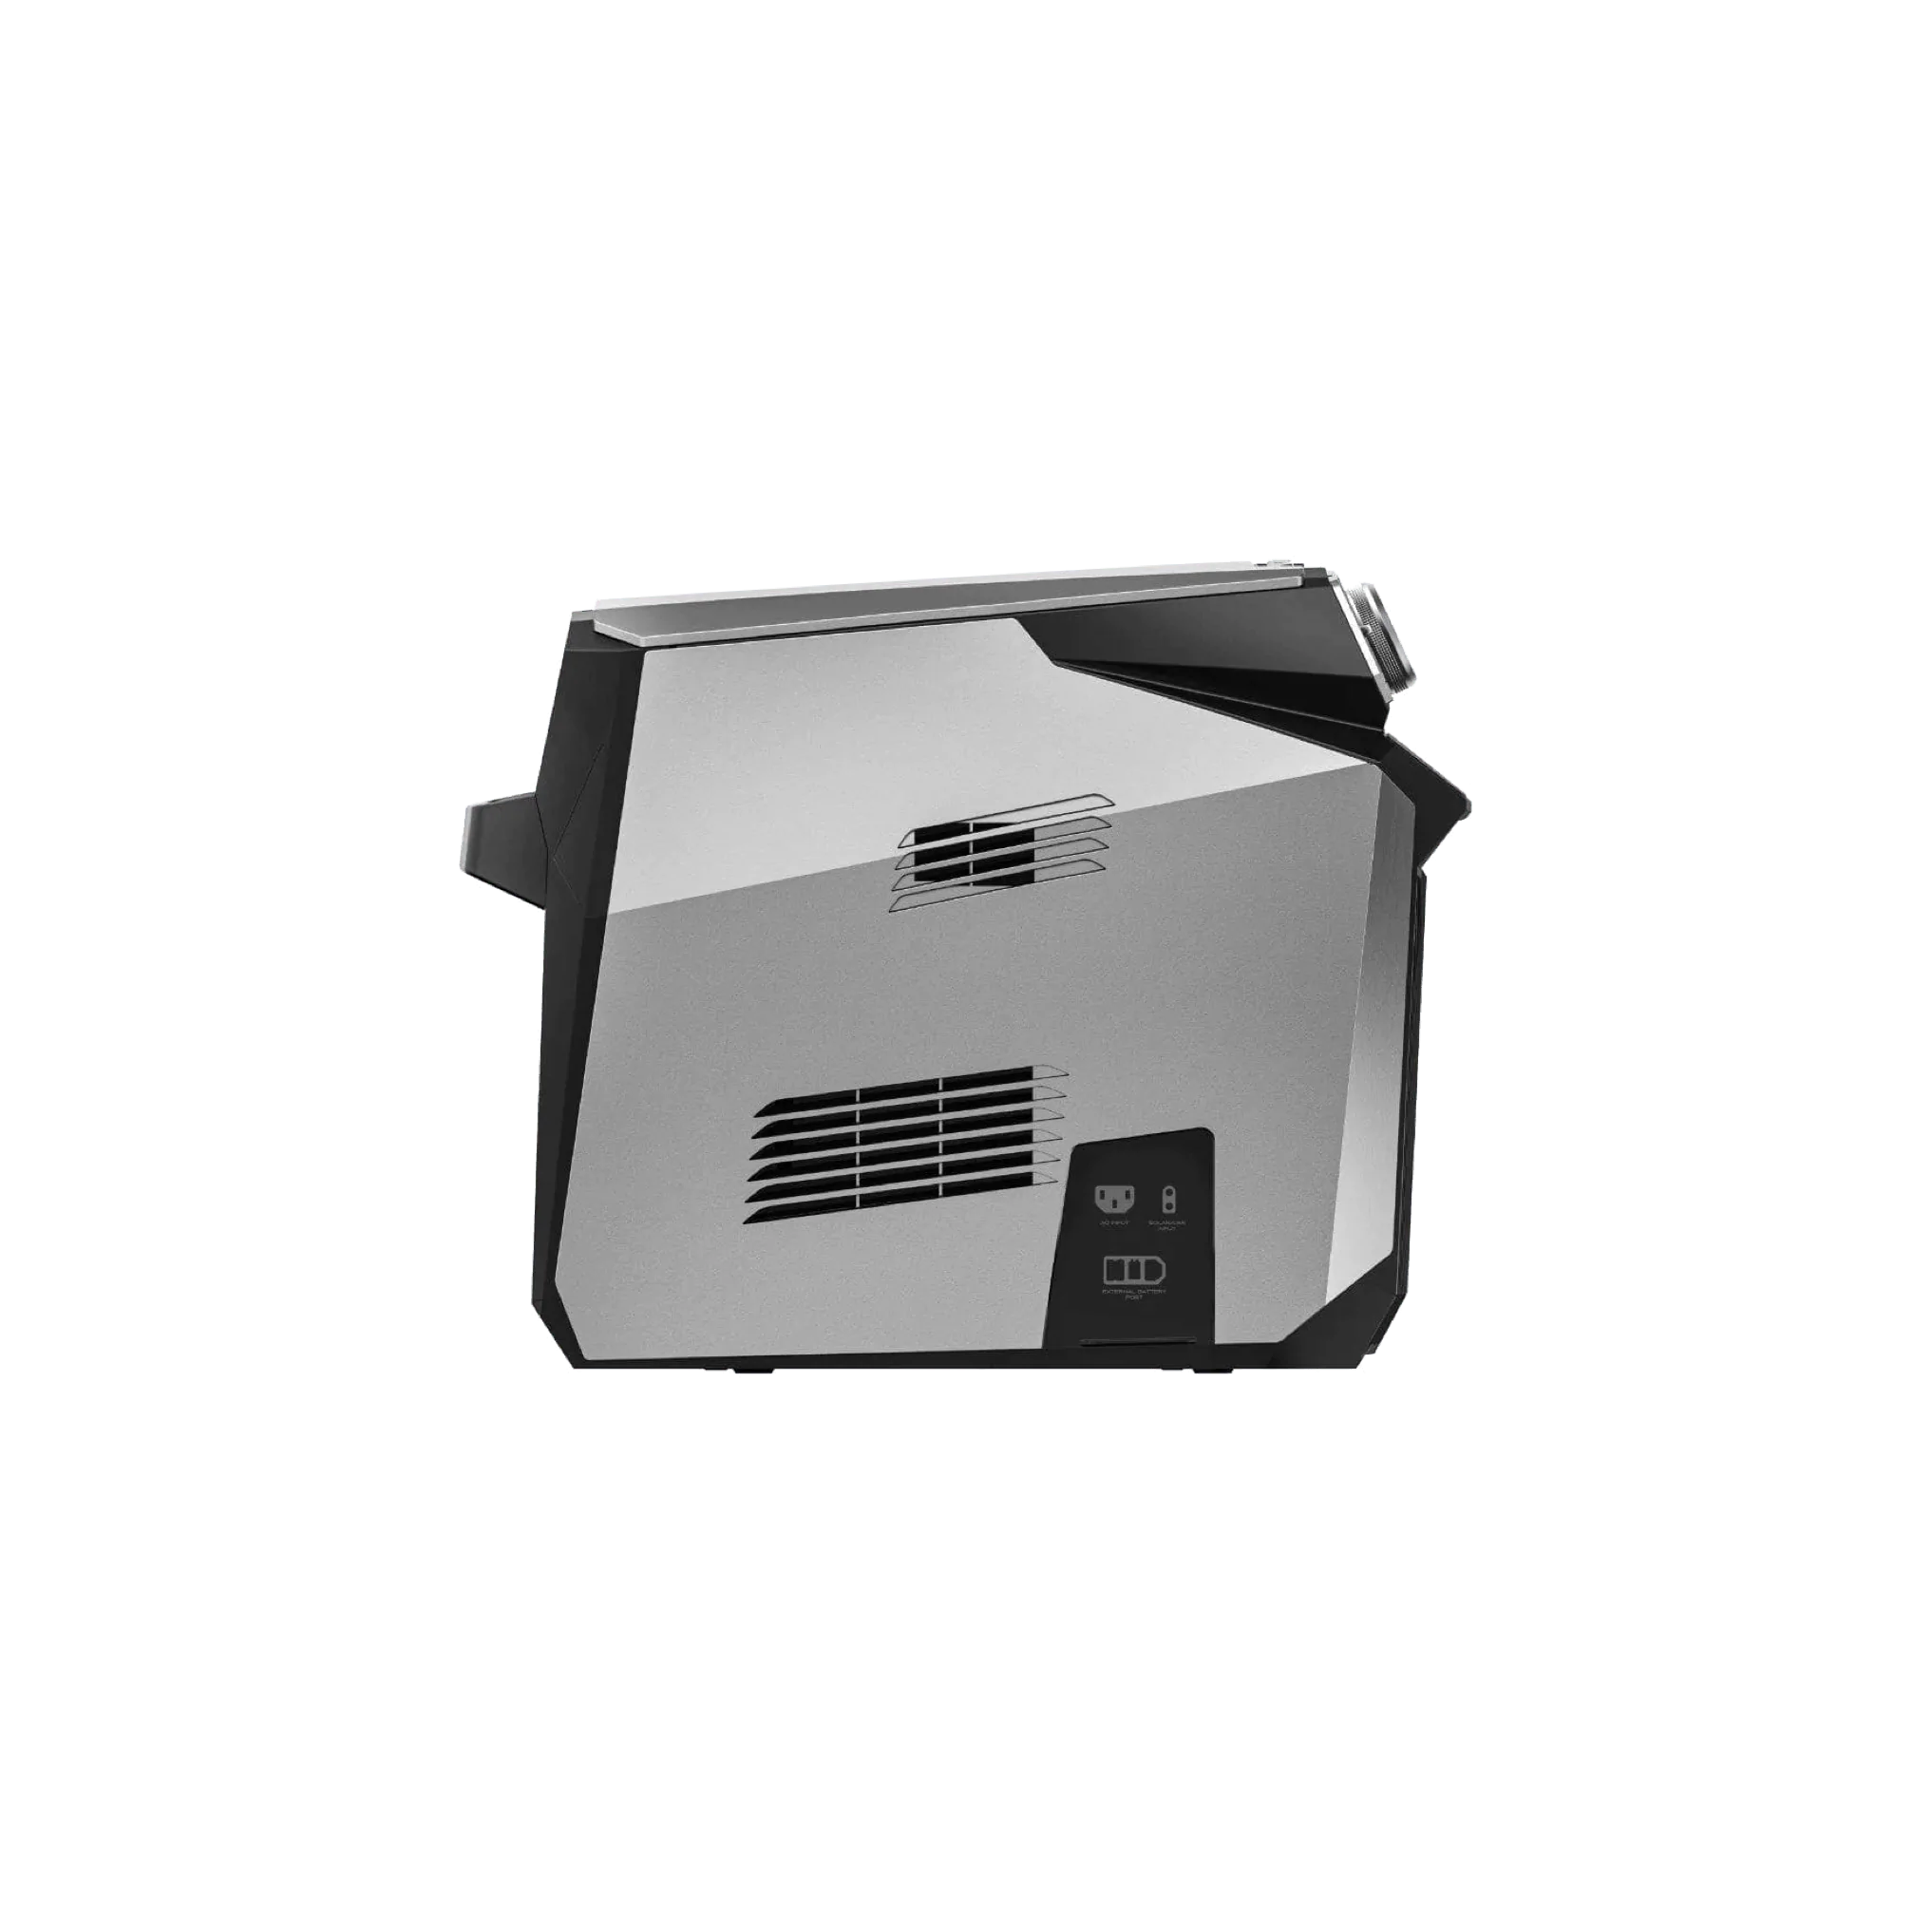 A silver and black EcoFlow Wave Portable Air Conditioner on a white background.